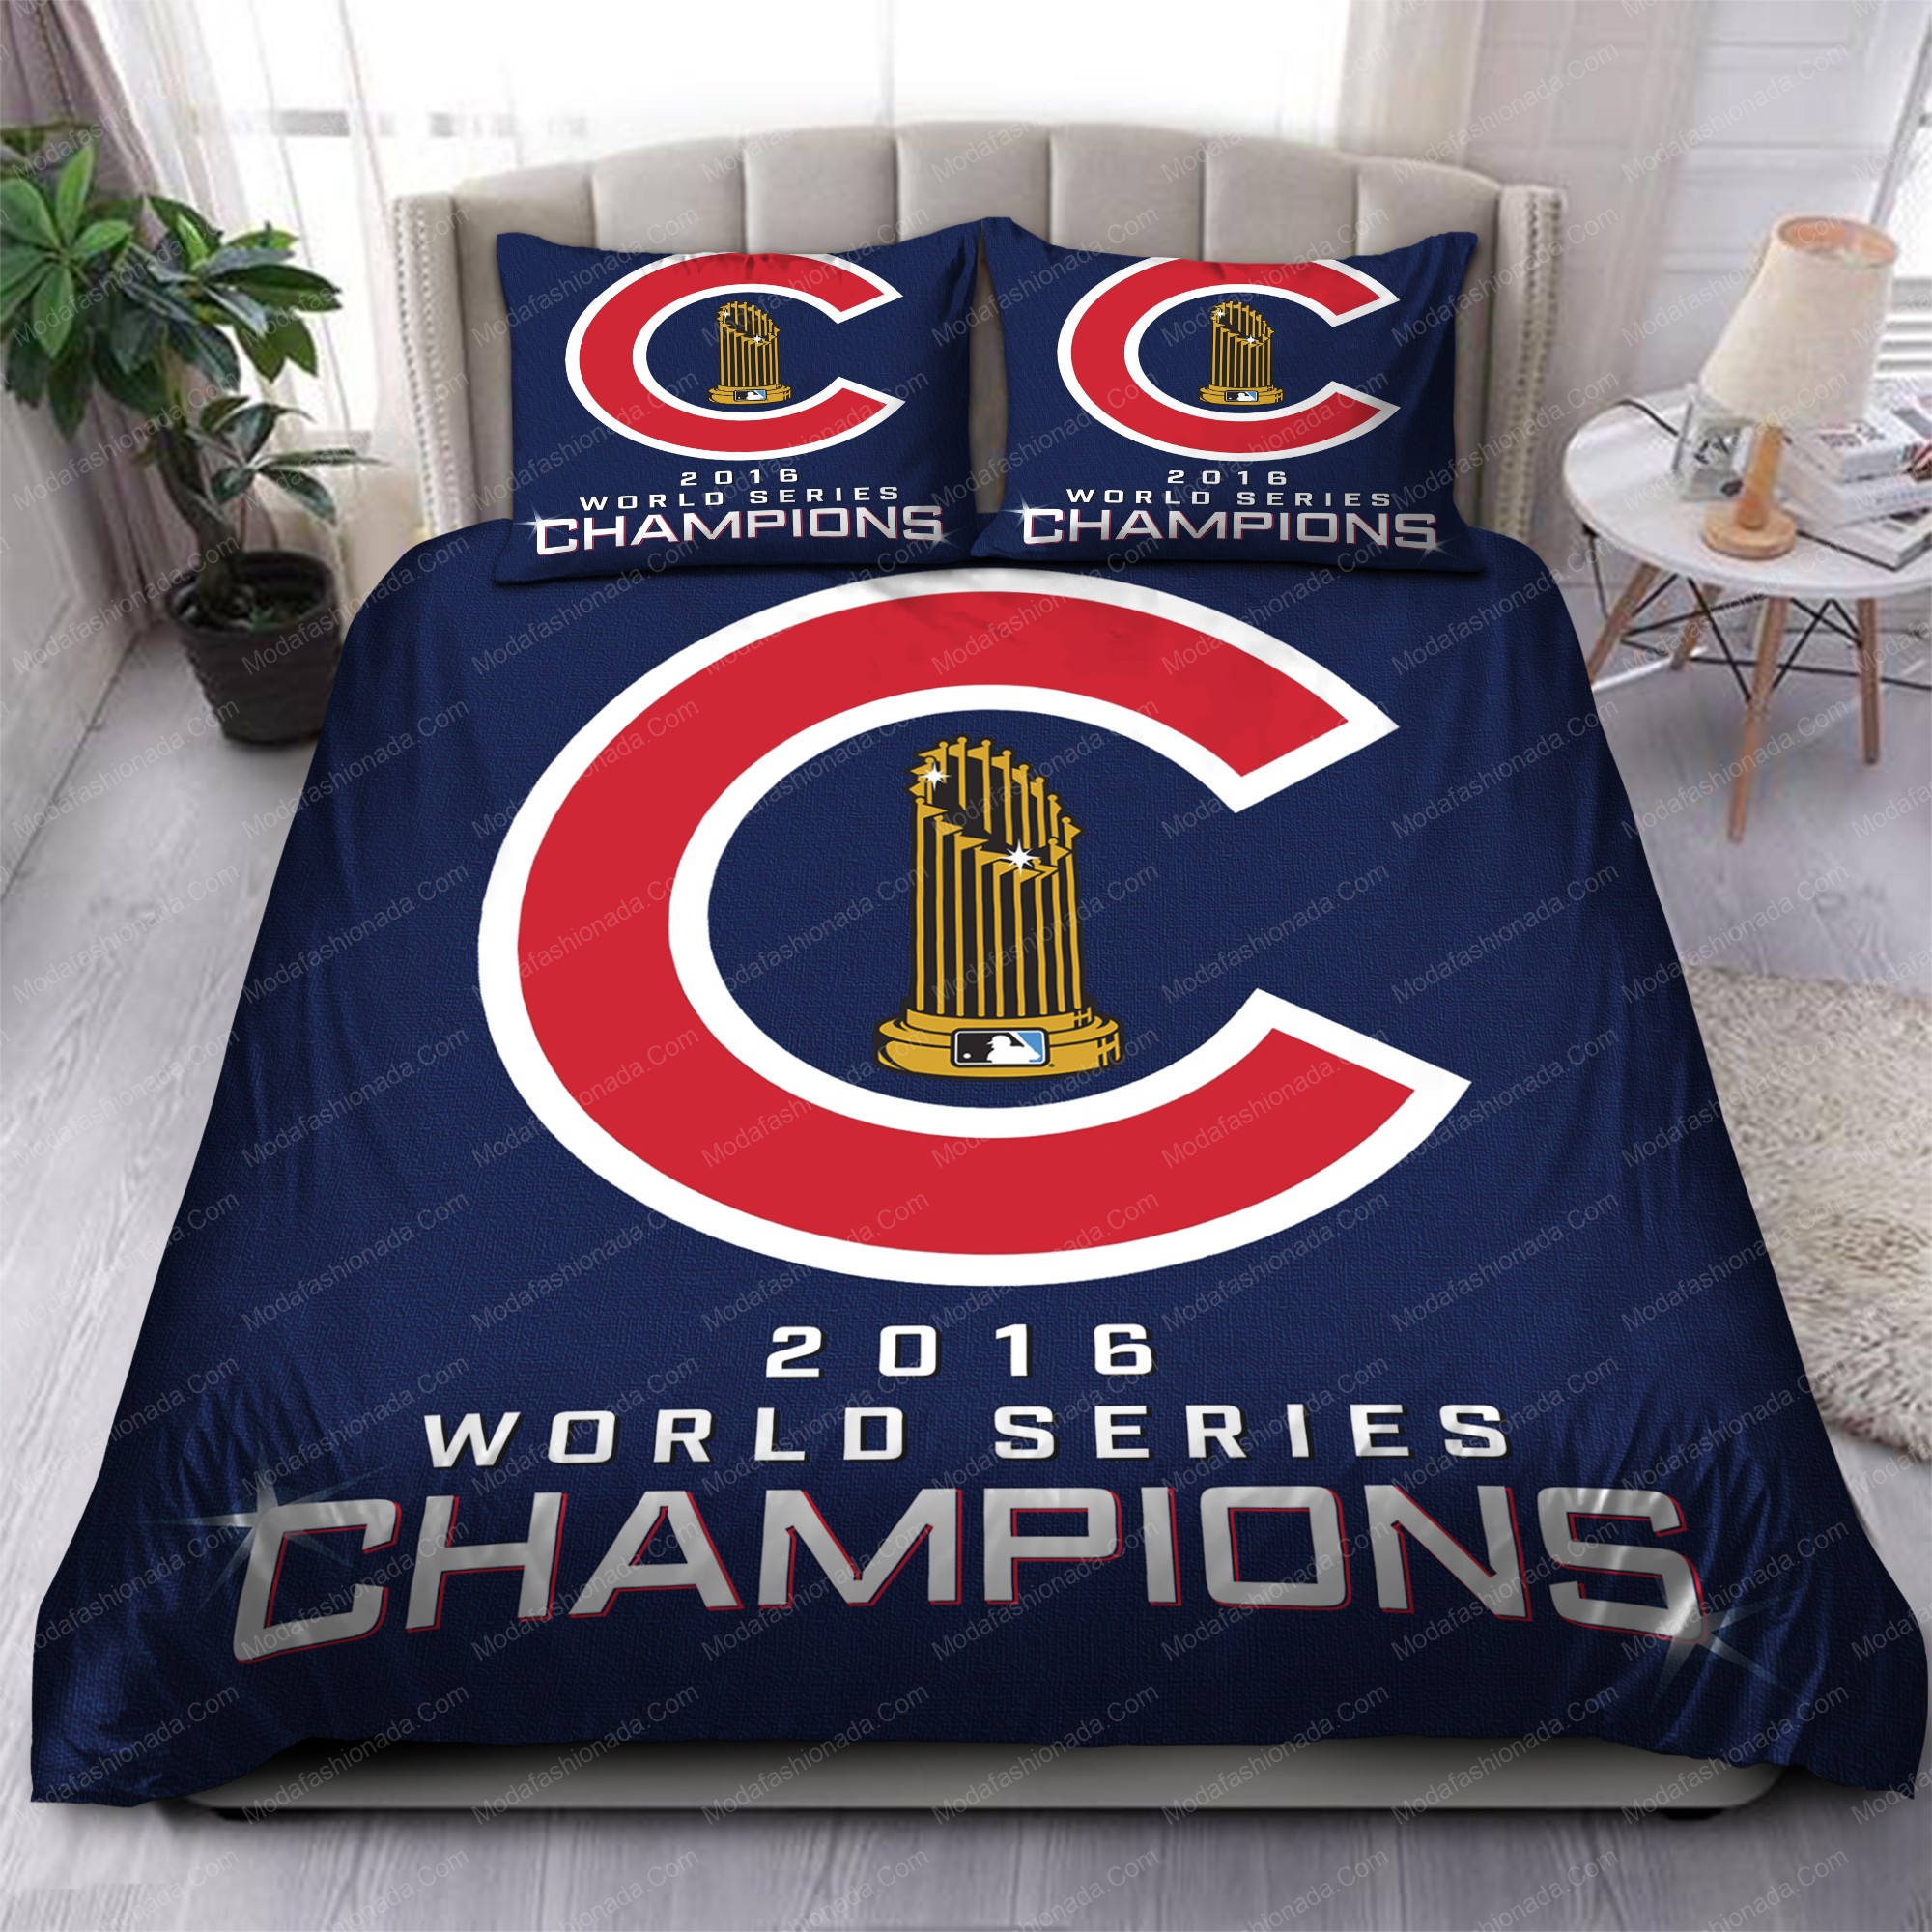 2016 Worrld Series Champions Chicago Cubs Mlb 66 Logo Type 1399 Bedding Sets Sporty Bedroom Home Decor